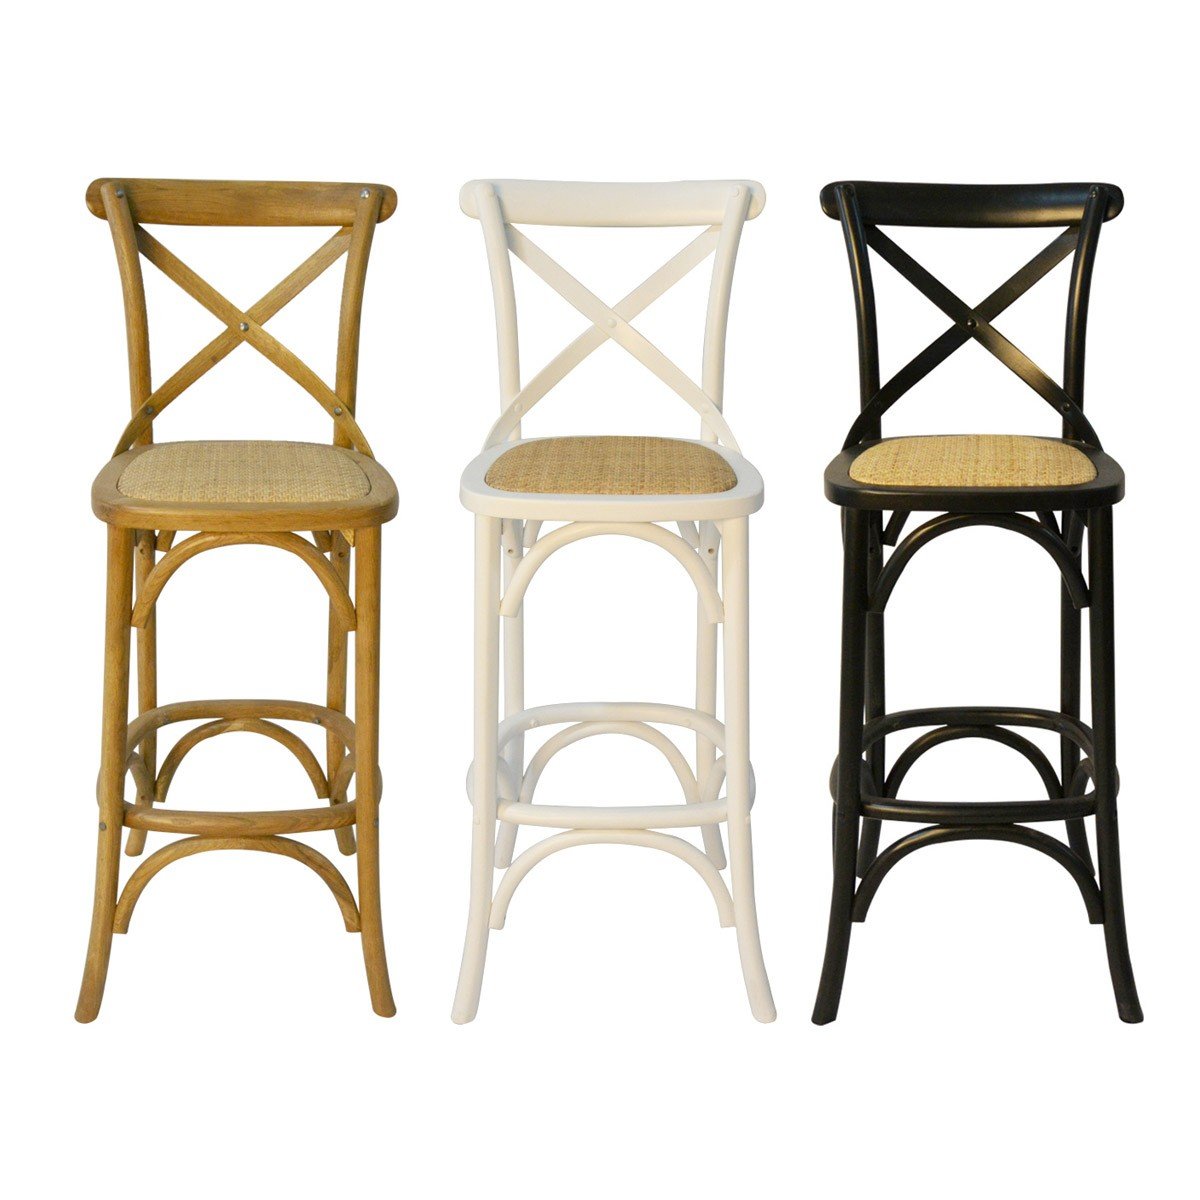 French Provincial Hamptons Cross, French Cane Back Bar Stools